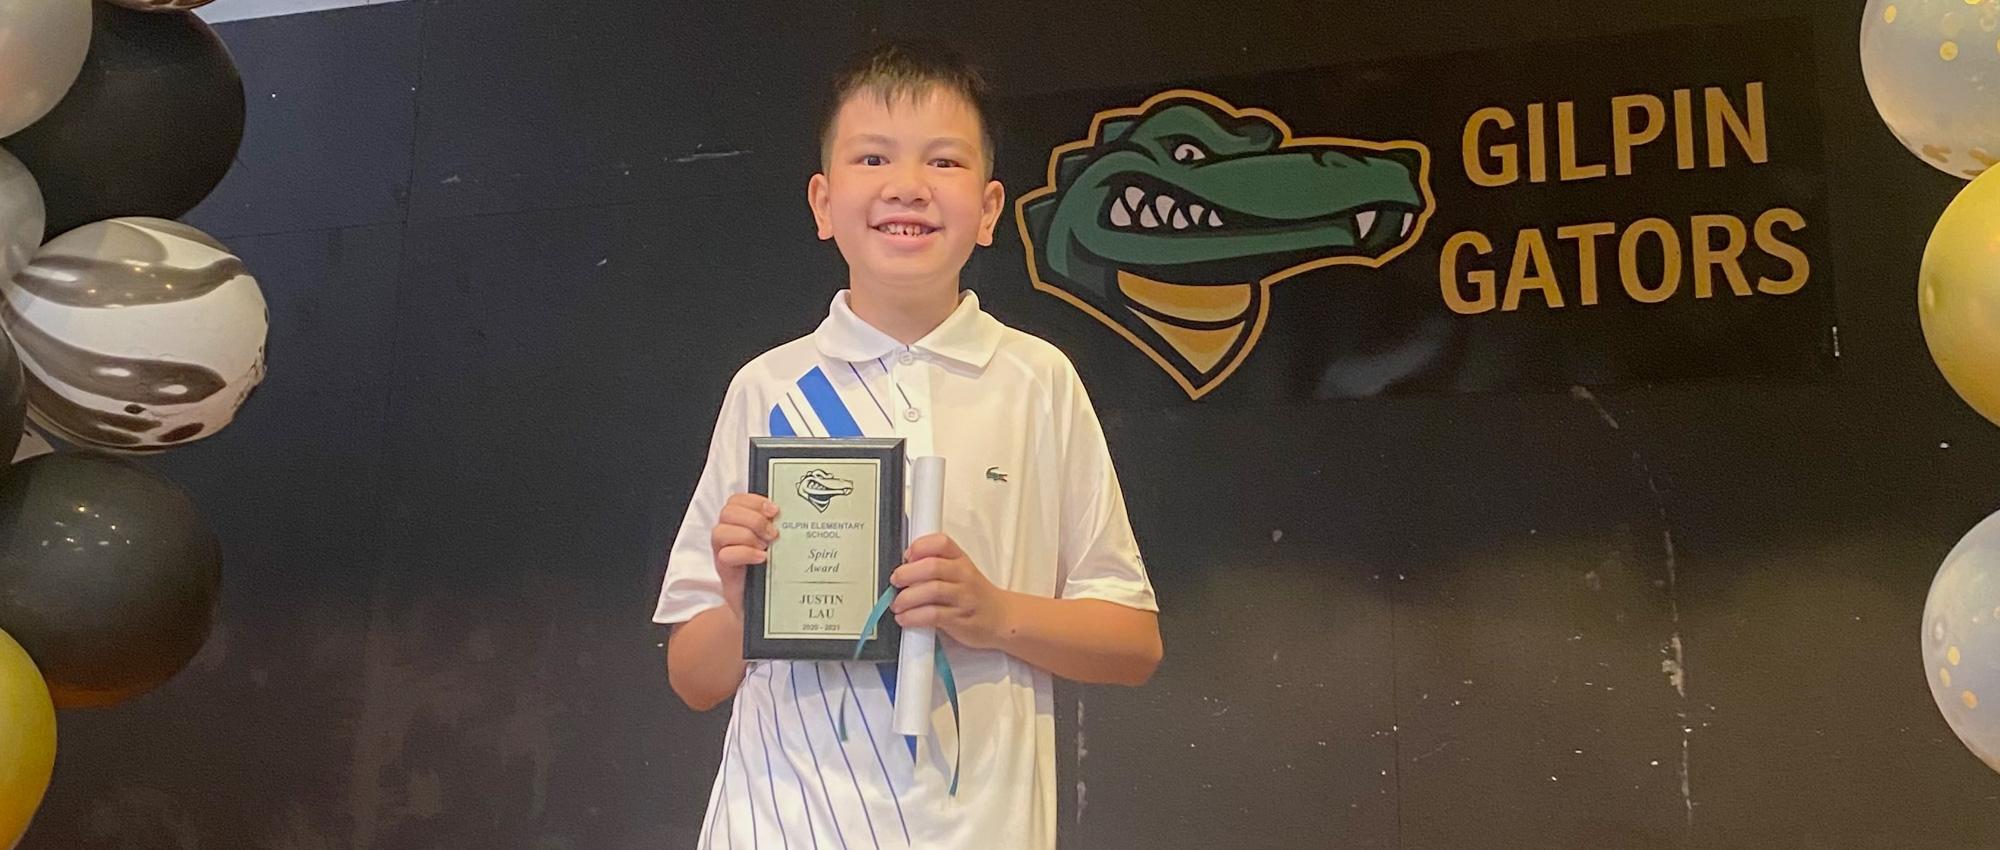 An Asian boy smiles as he holds his award plaque in front of a black background with “Gilpin Gators” inscription and logo. 